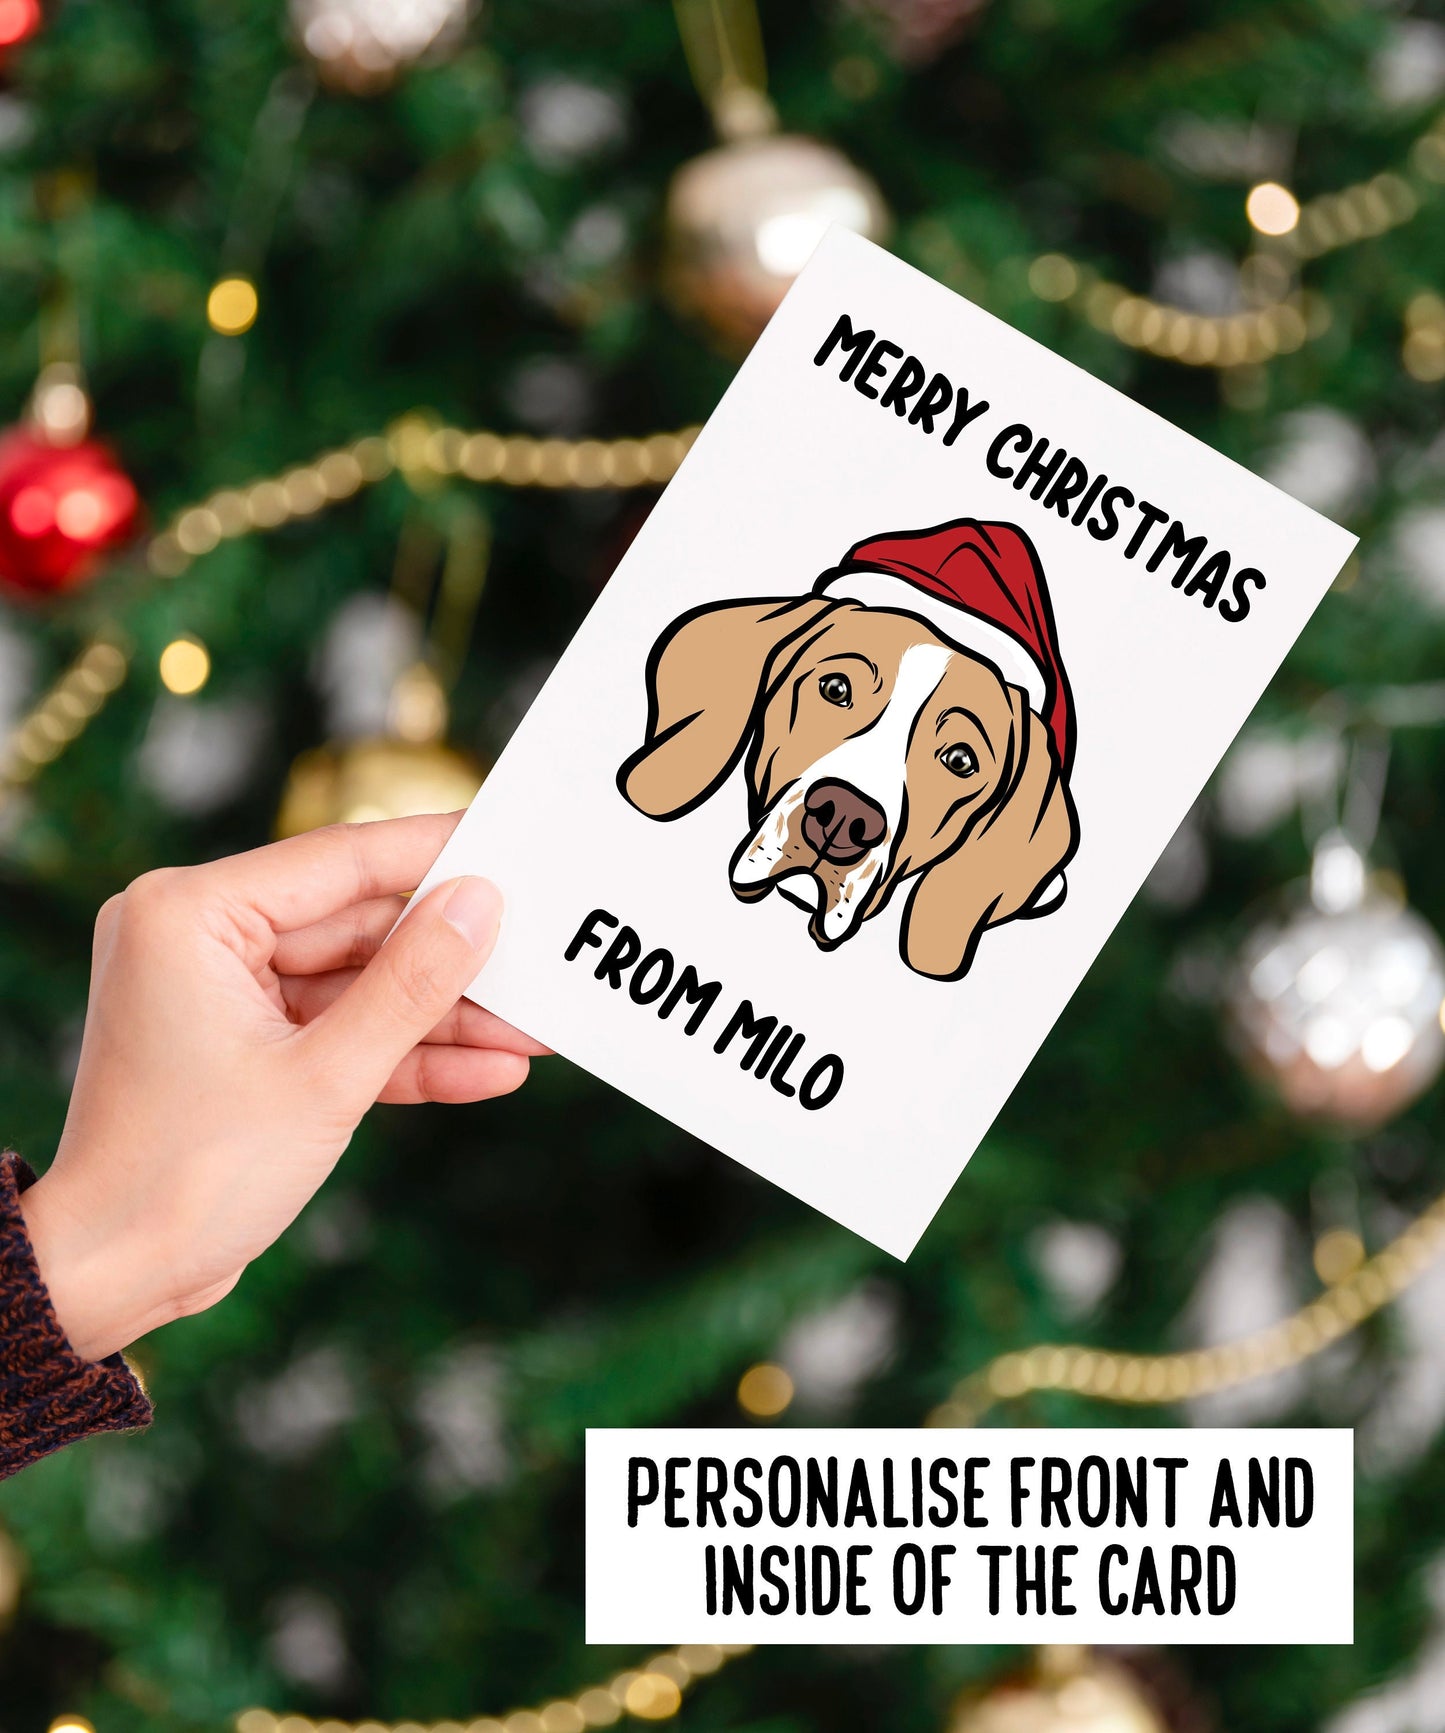 English Pointer Christmas Card/ Personalised Dog Breed Festive Greeting Card/ Pointer Dog Illustration Folded Card/ Pointer Owner Postcard